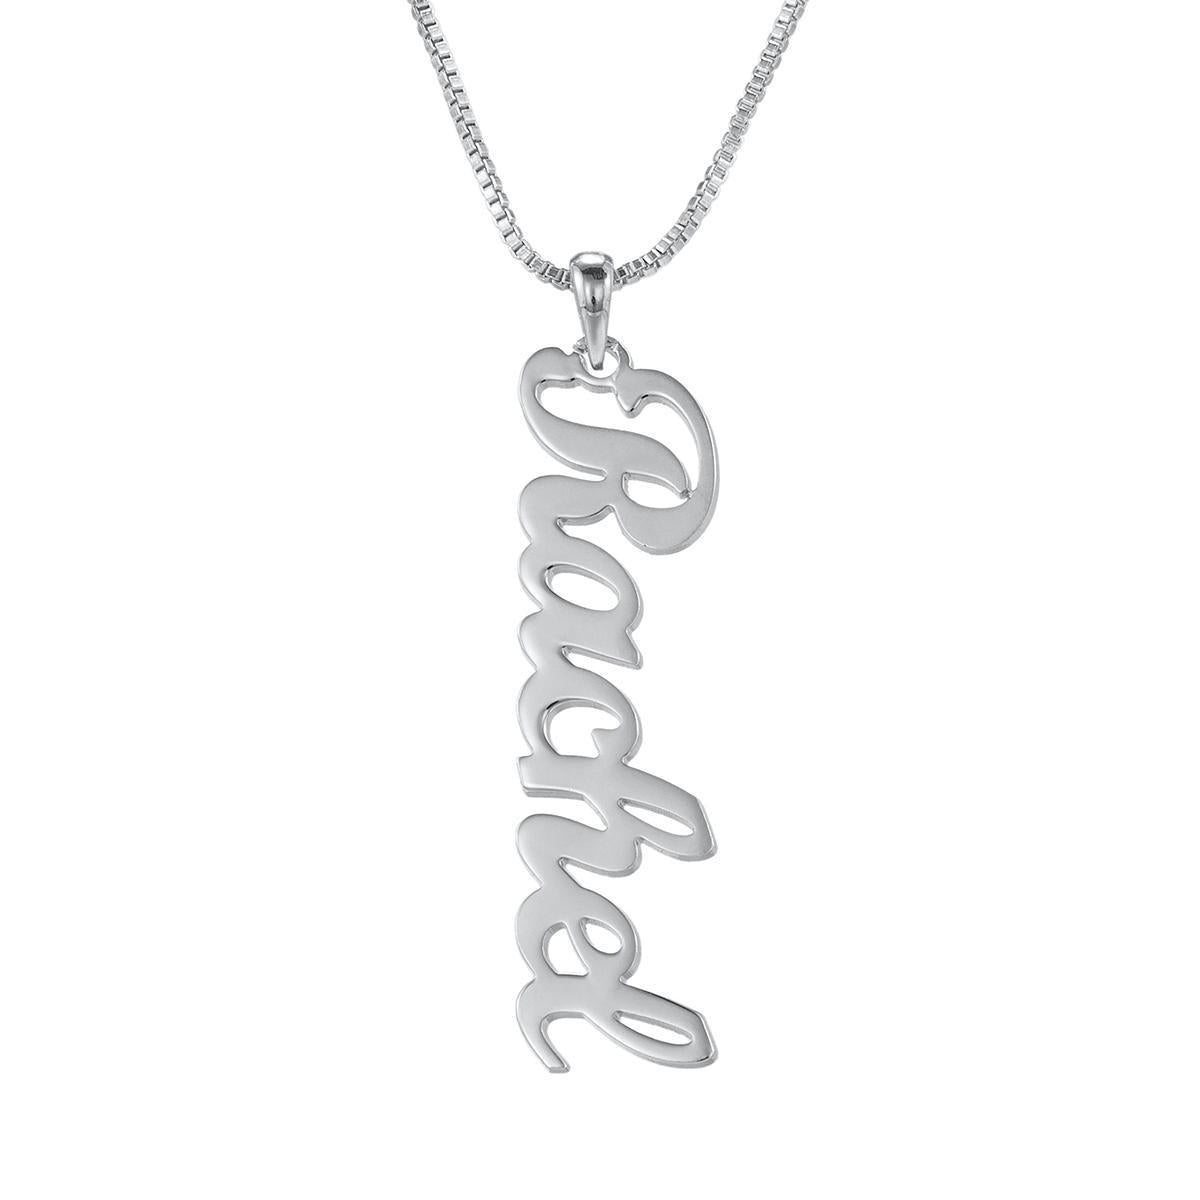 Personalized Vertical Elegance Necklace